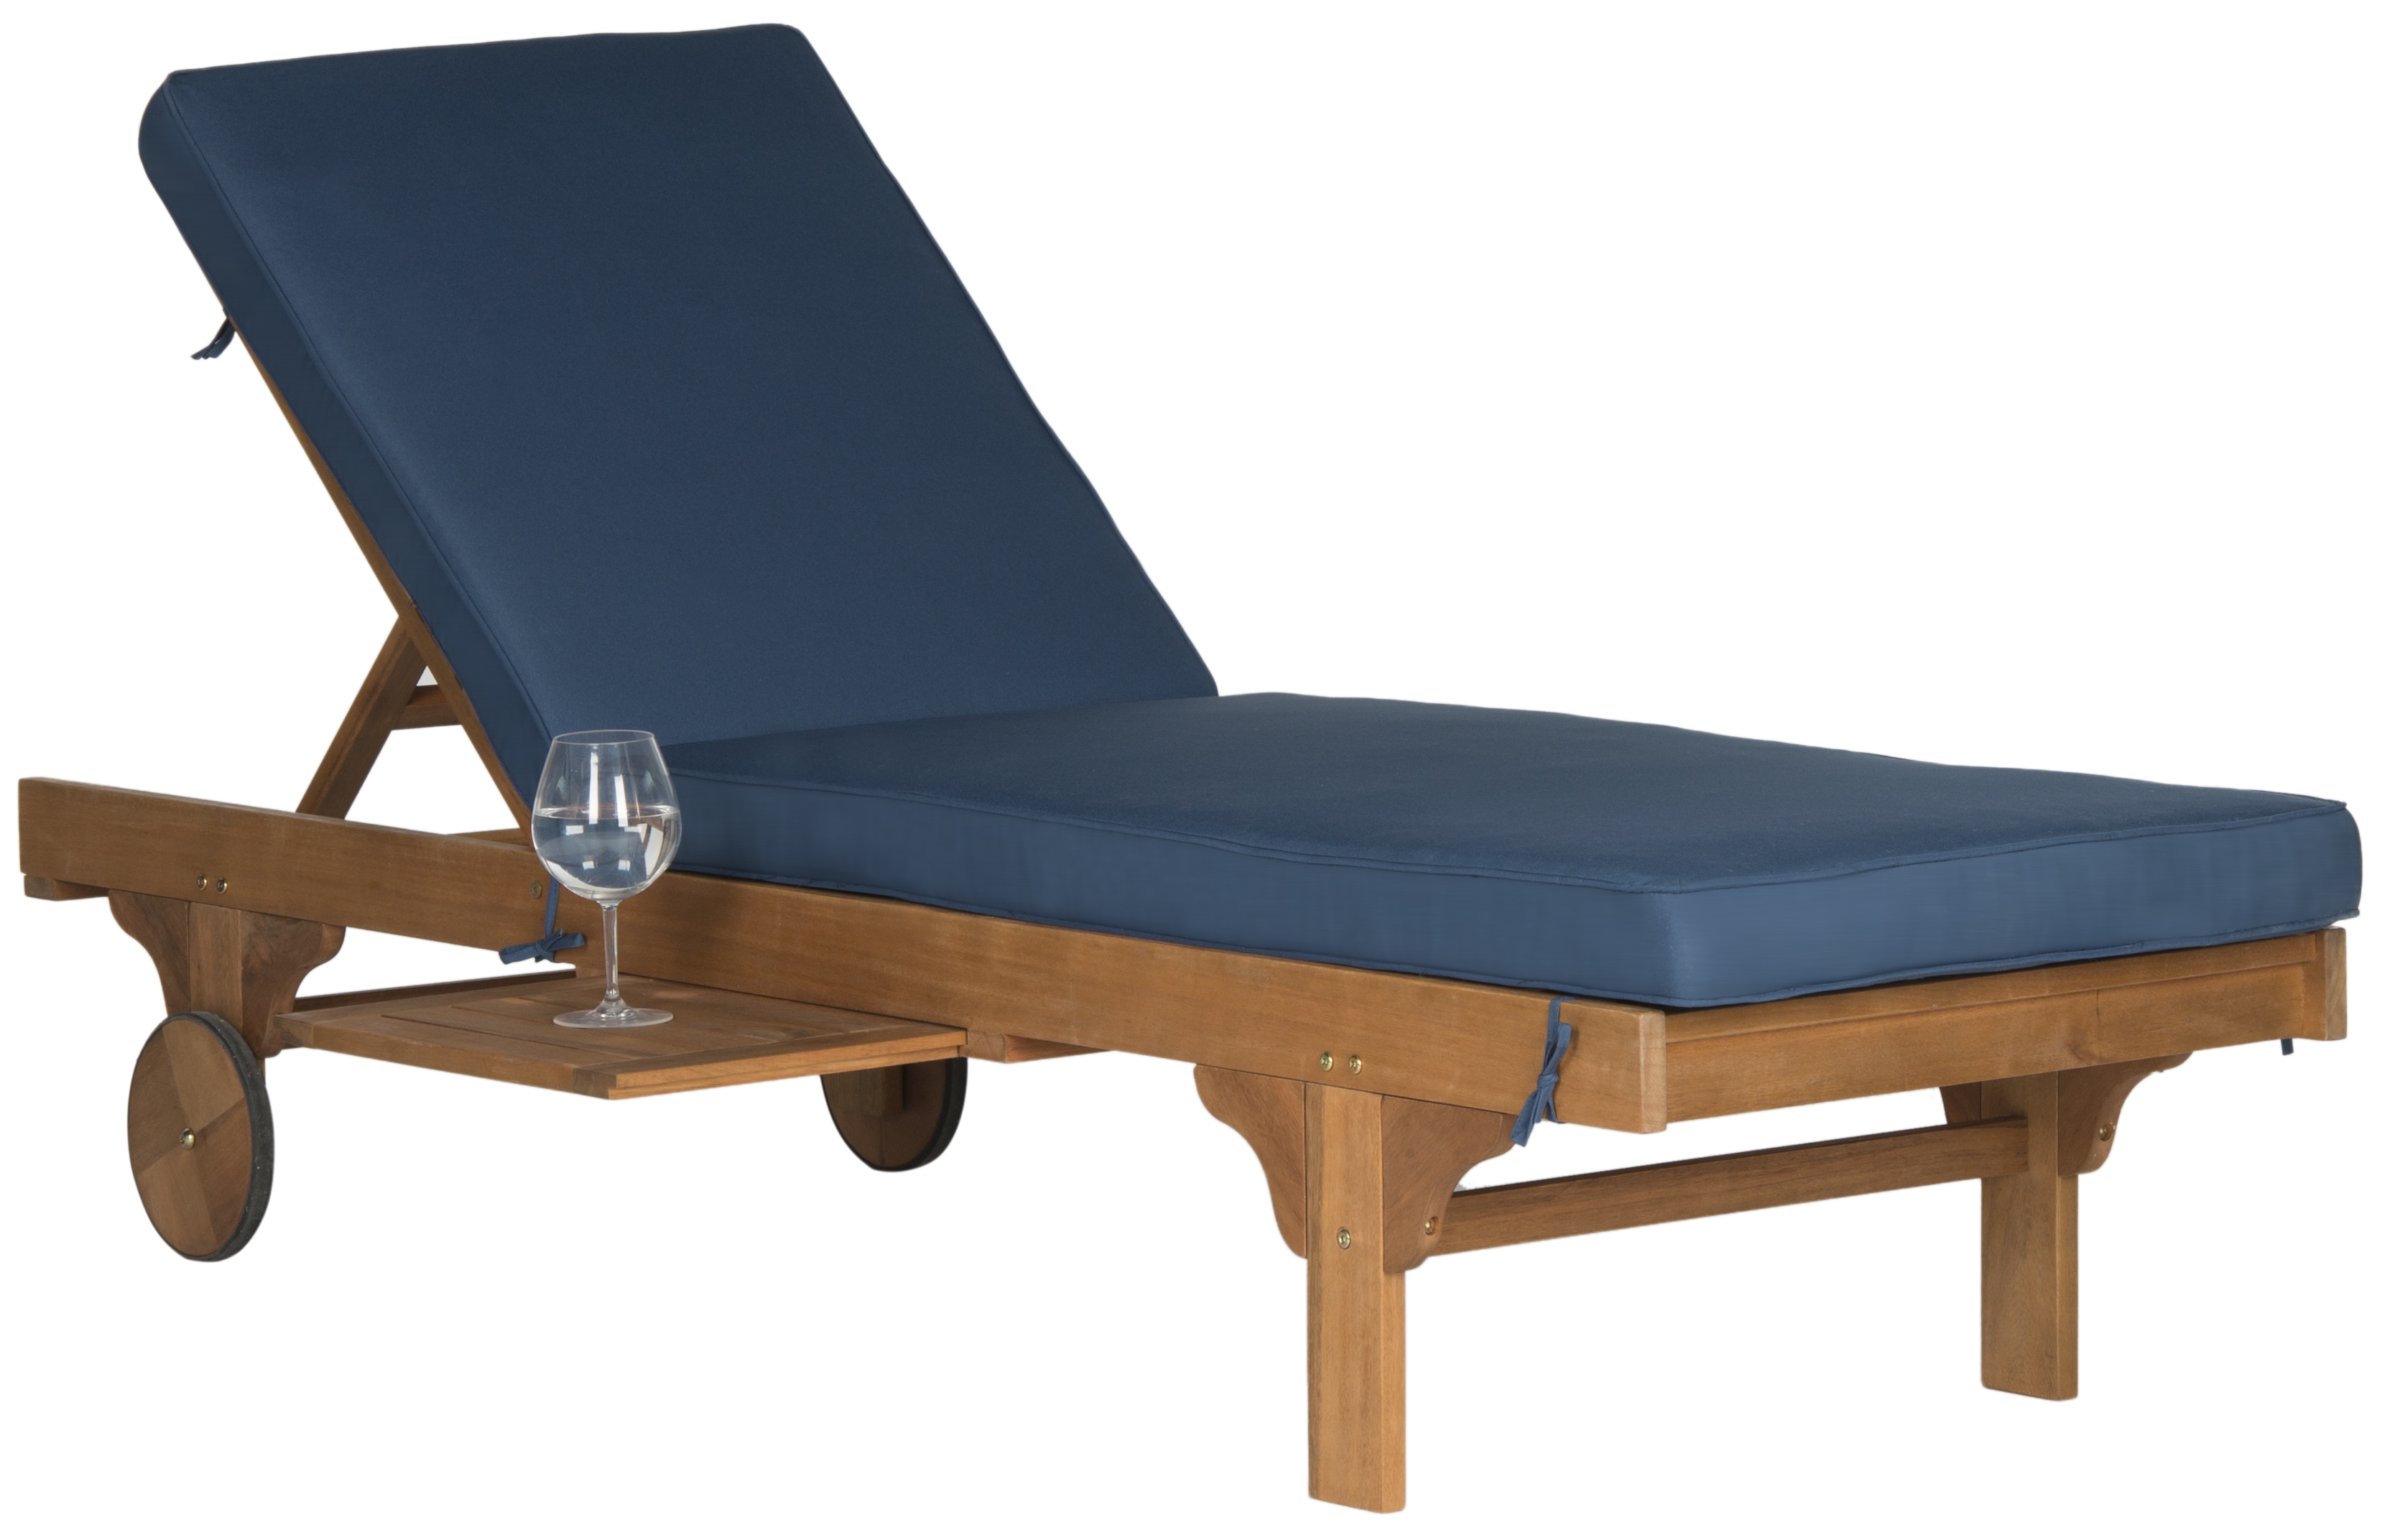 Newport Chaise Lounge Chair With Side Table - Natural/Navy - Safavieh - Image 5